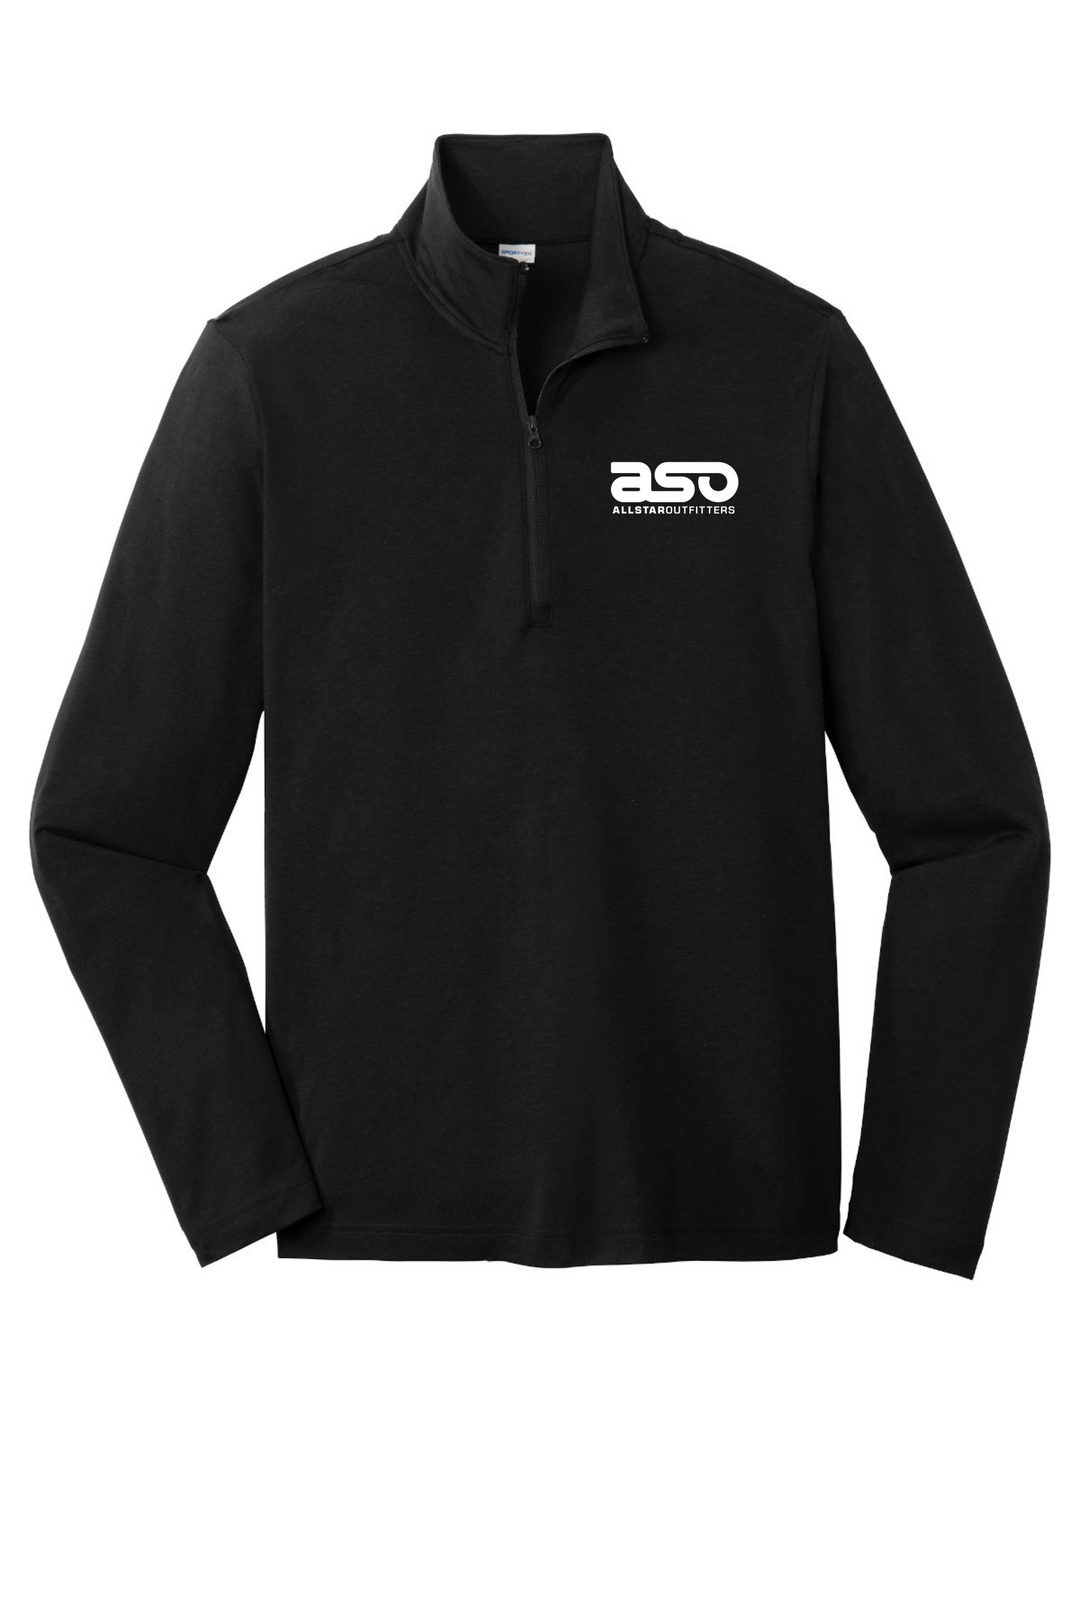 ASO Manager 1/4 Zip